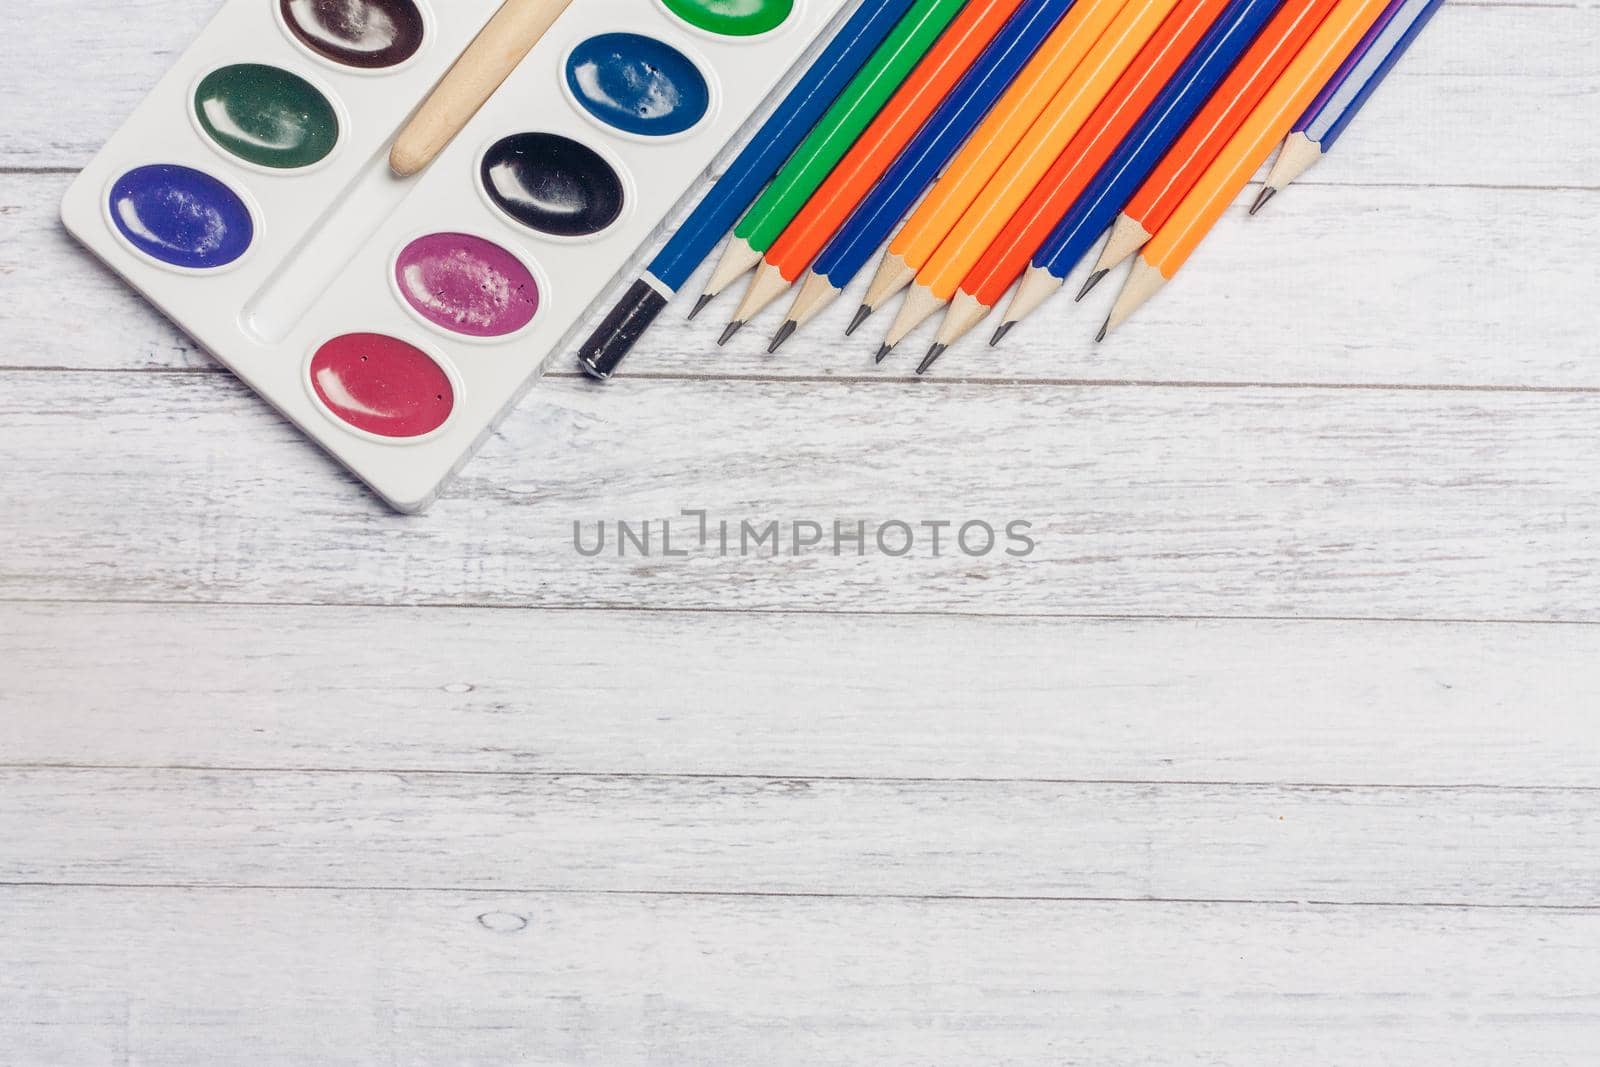 watercolor paint colored pencils wooden table art school drawing background image by SHOTPRIME